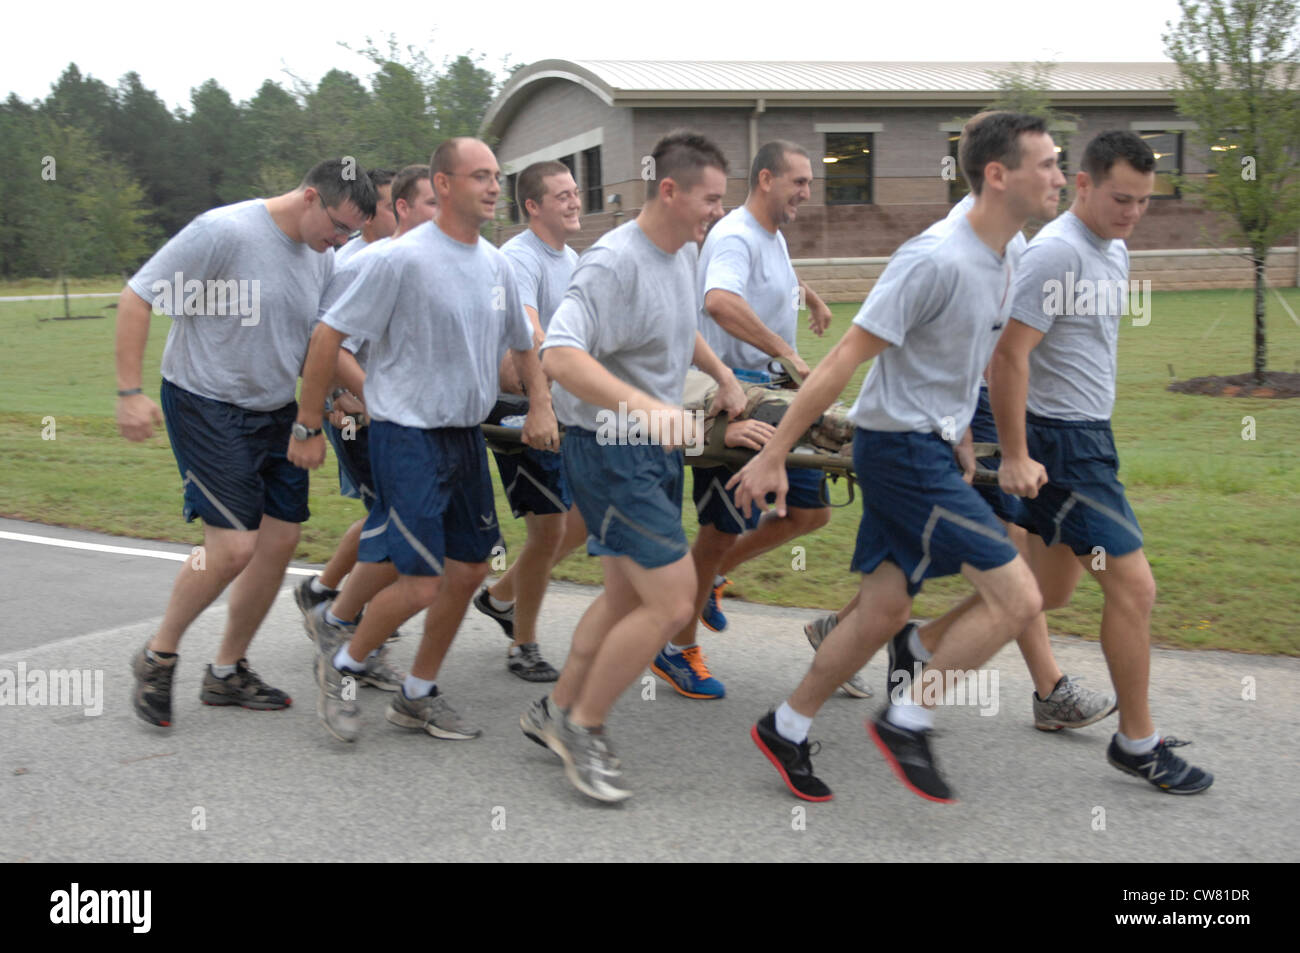 Airmen from 20th Civil Engineering Squadron, Explosive Ordinance Disposal run together carrying a dummy during the 5K Poker Run at Shaw Air Force Base, S.C., Aug. 10, 2012. They trained carrying the dummy to promote team work and practiced the concept “never leave an Airman behind.” To support that belief, they carried the dummy through the entire 3 ½ mile race. Stock Photo